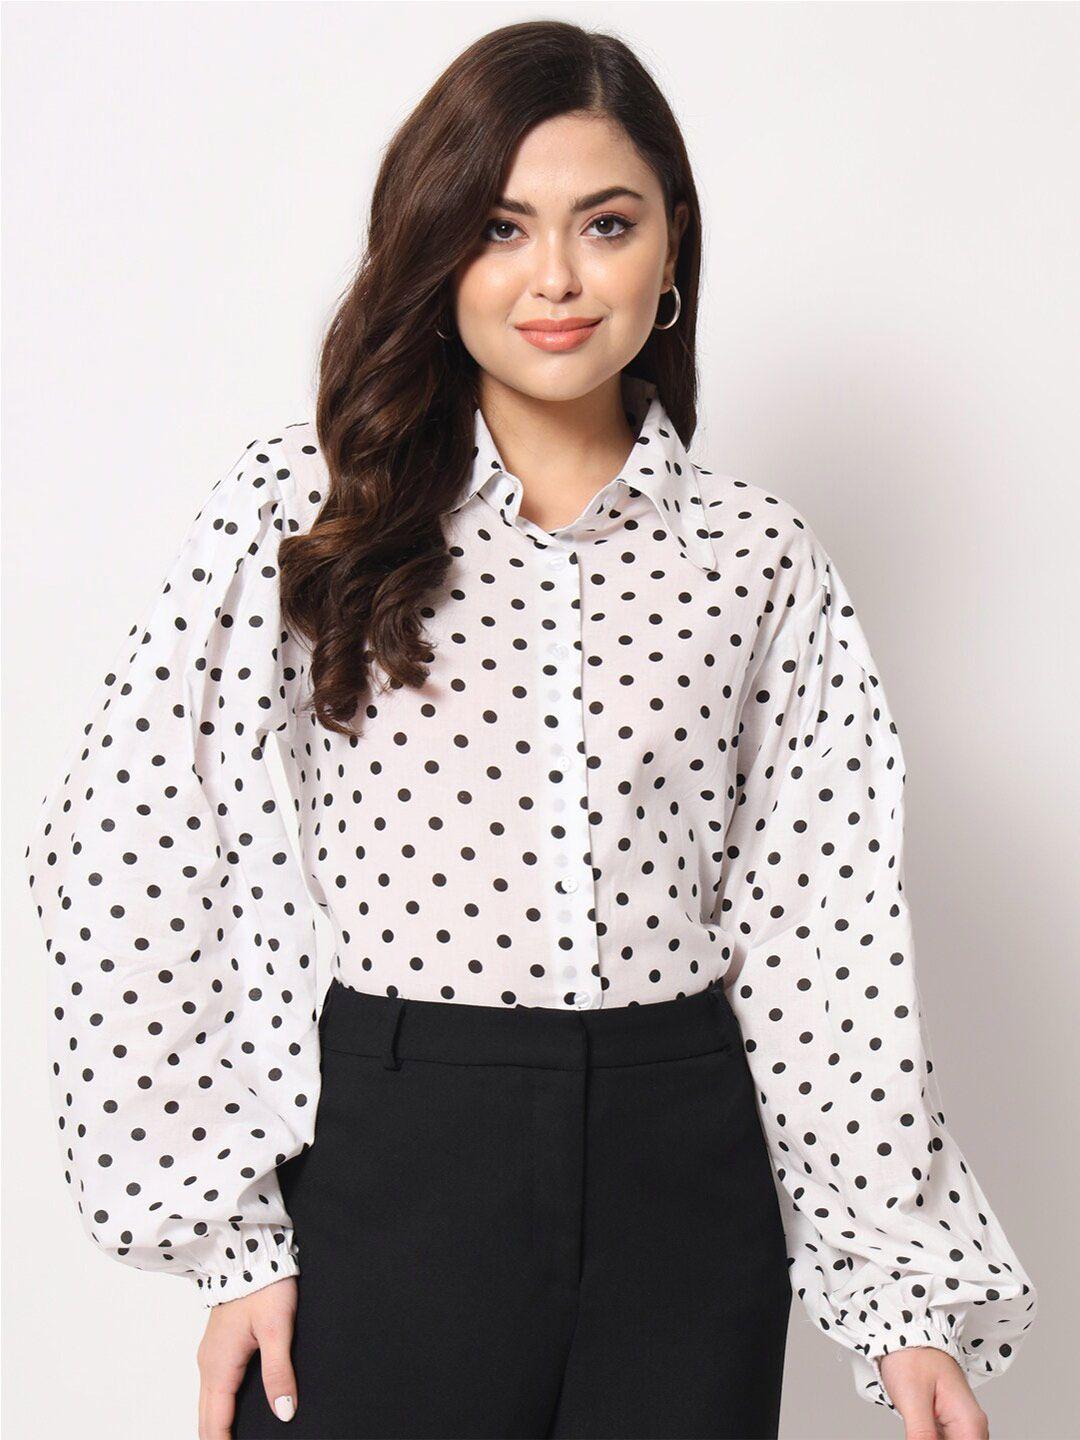 trend arrest women contemporary polka dots printed formal cotton shirt